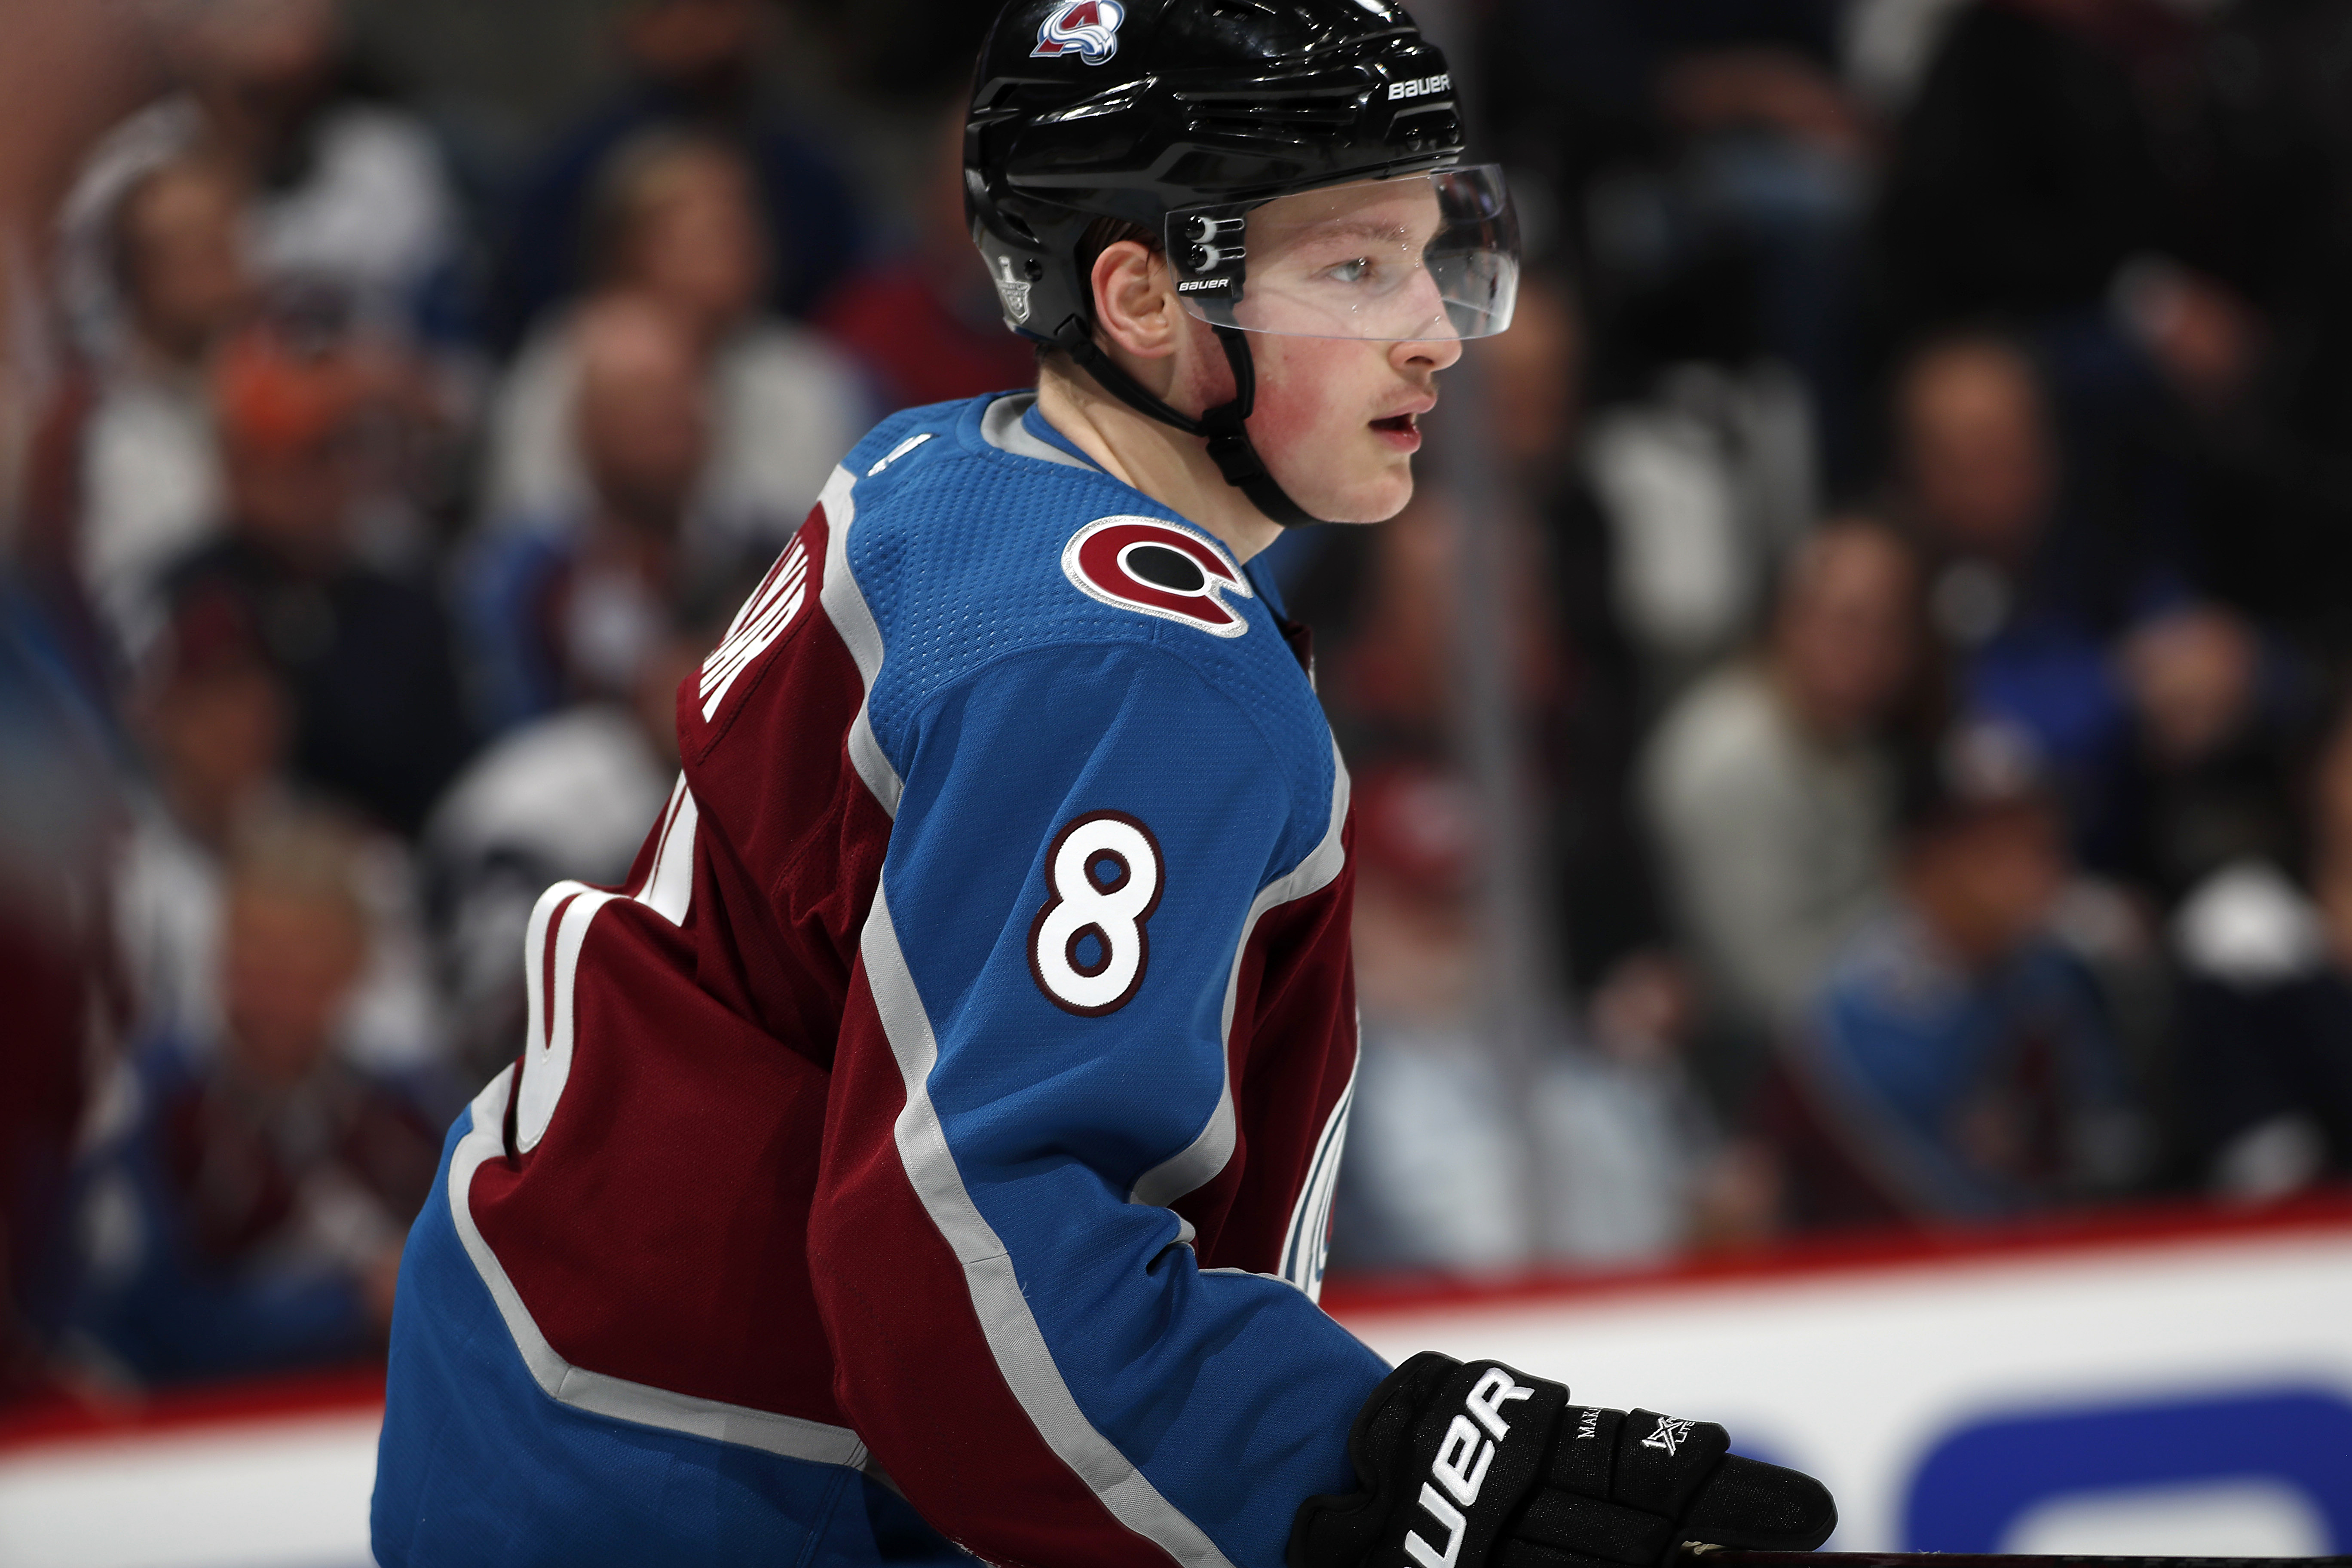 Makar shines in NHL debut, Avs beat Flames 6-2 for 2-1 lead